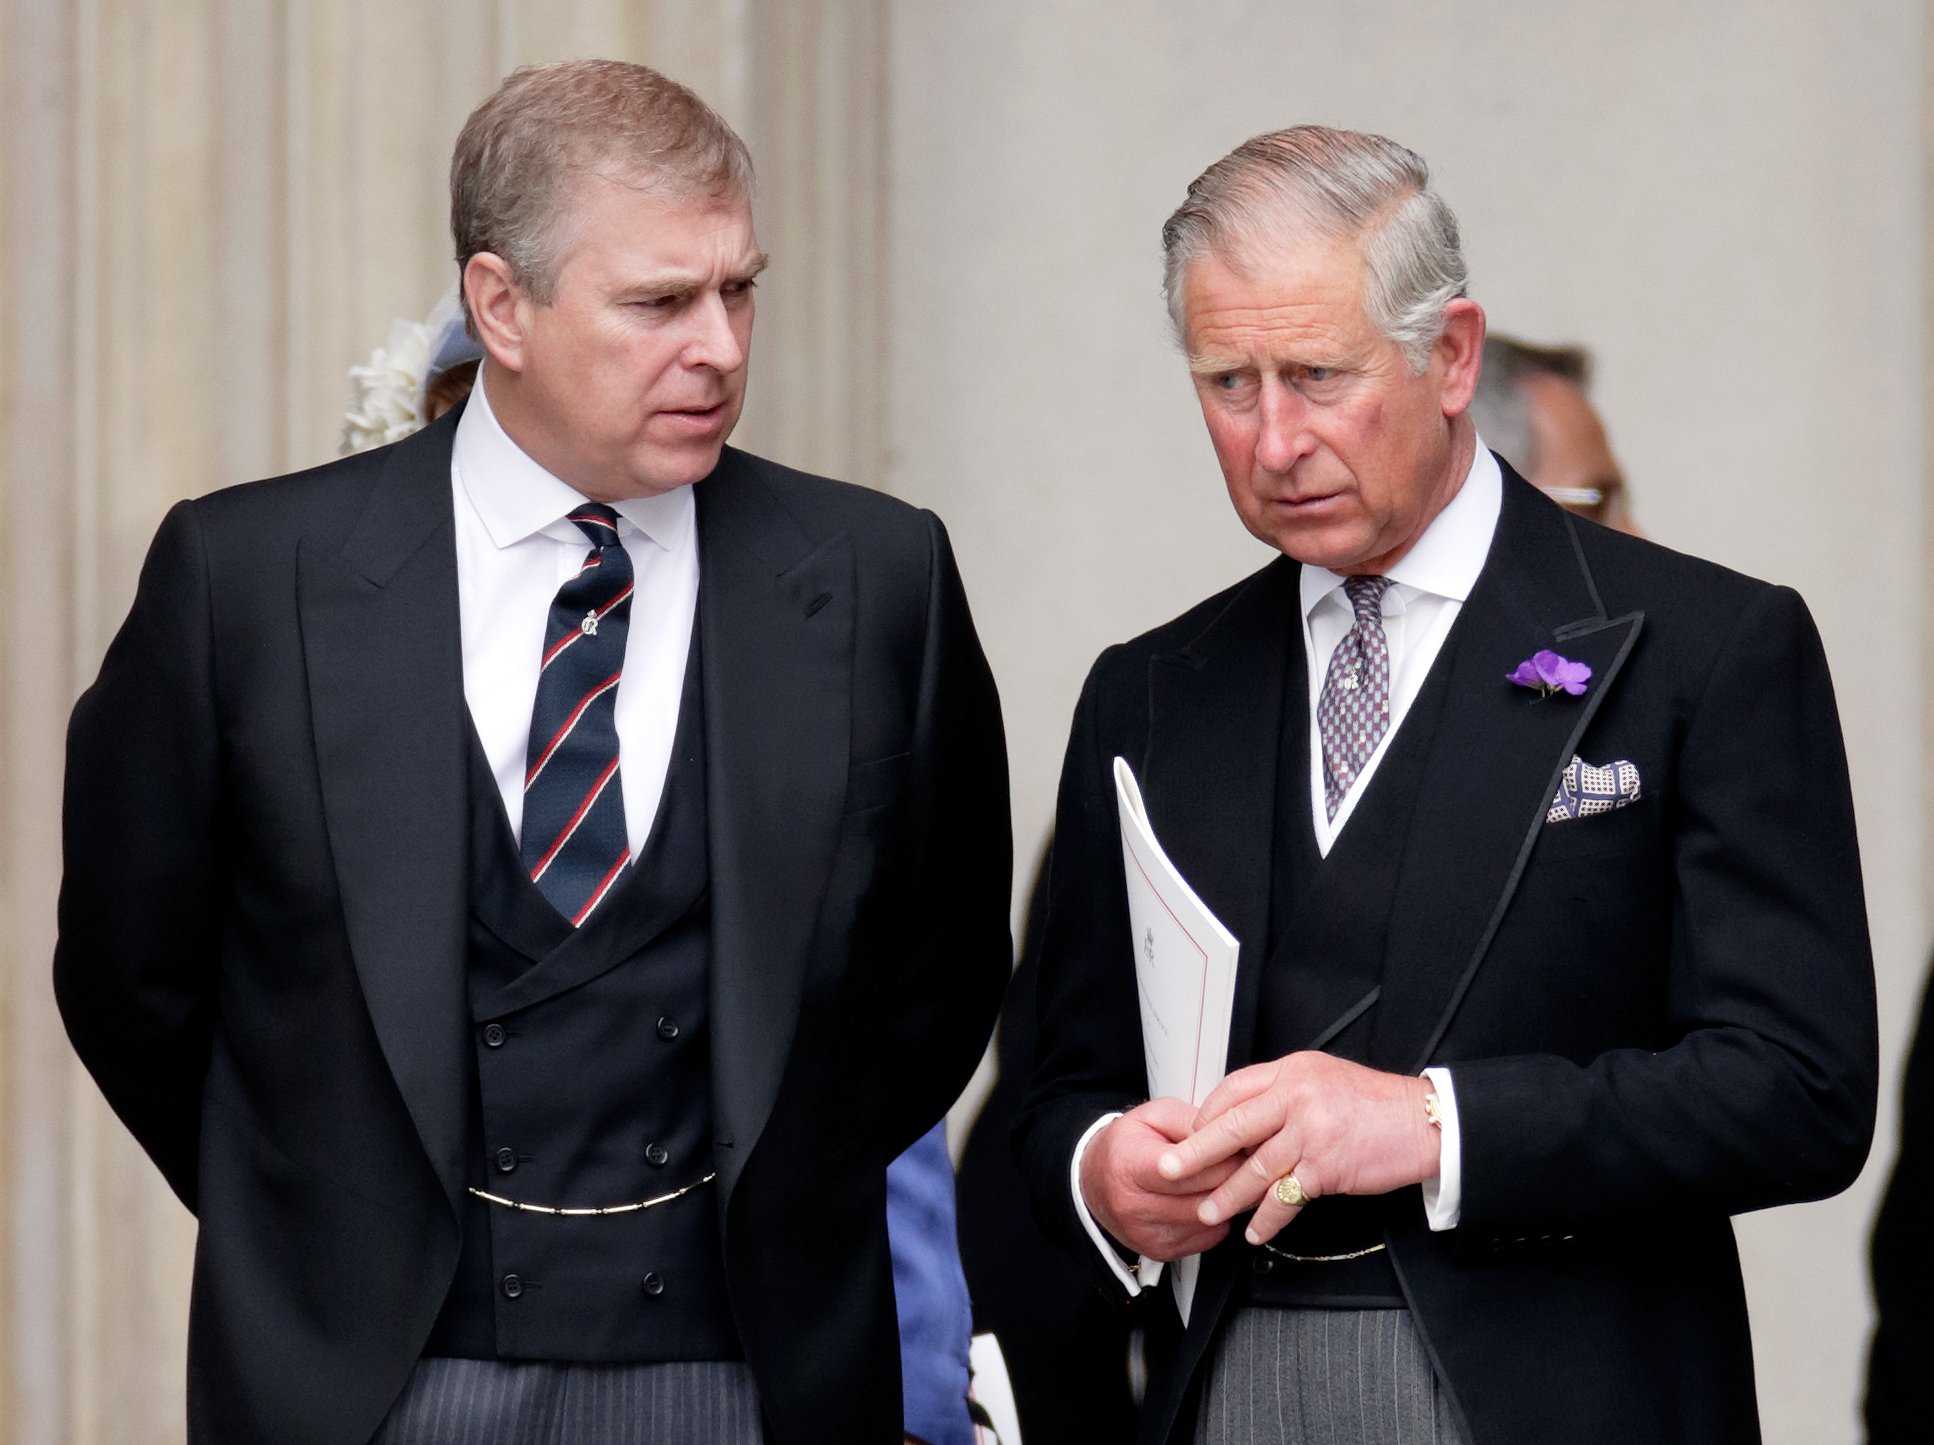 Prince Andrew and Prince Charles at a Service of Thanksgiving to celebrate Queen Elizabeth II's Diamond Jubilee on June 5, 2012, in London, England | Source: Getty Images